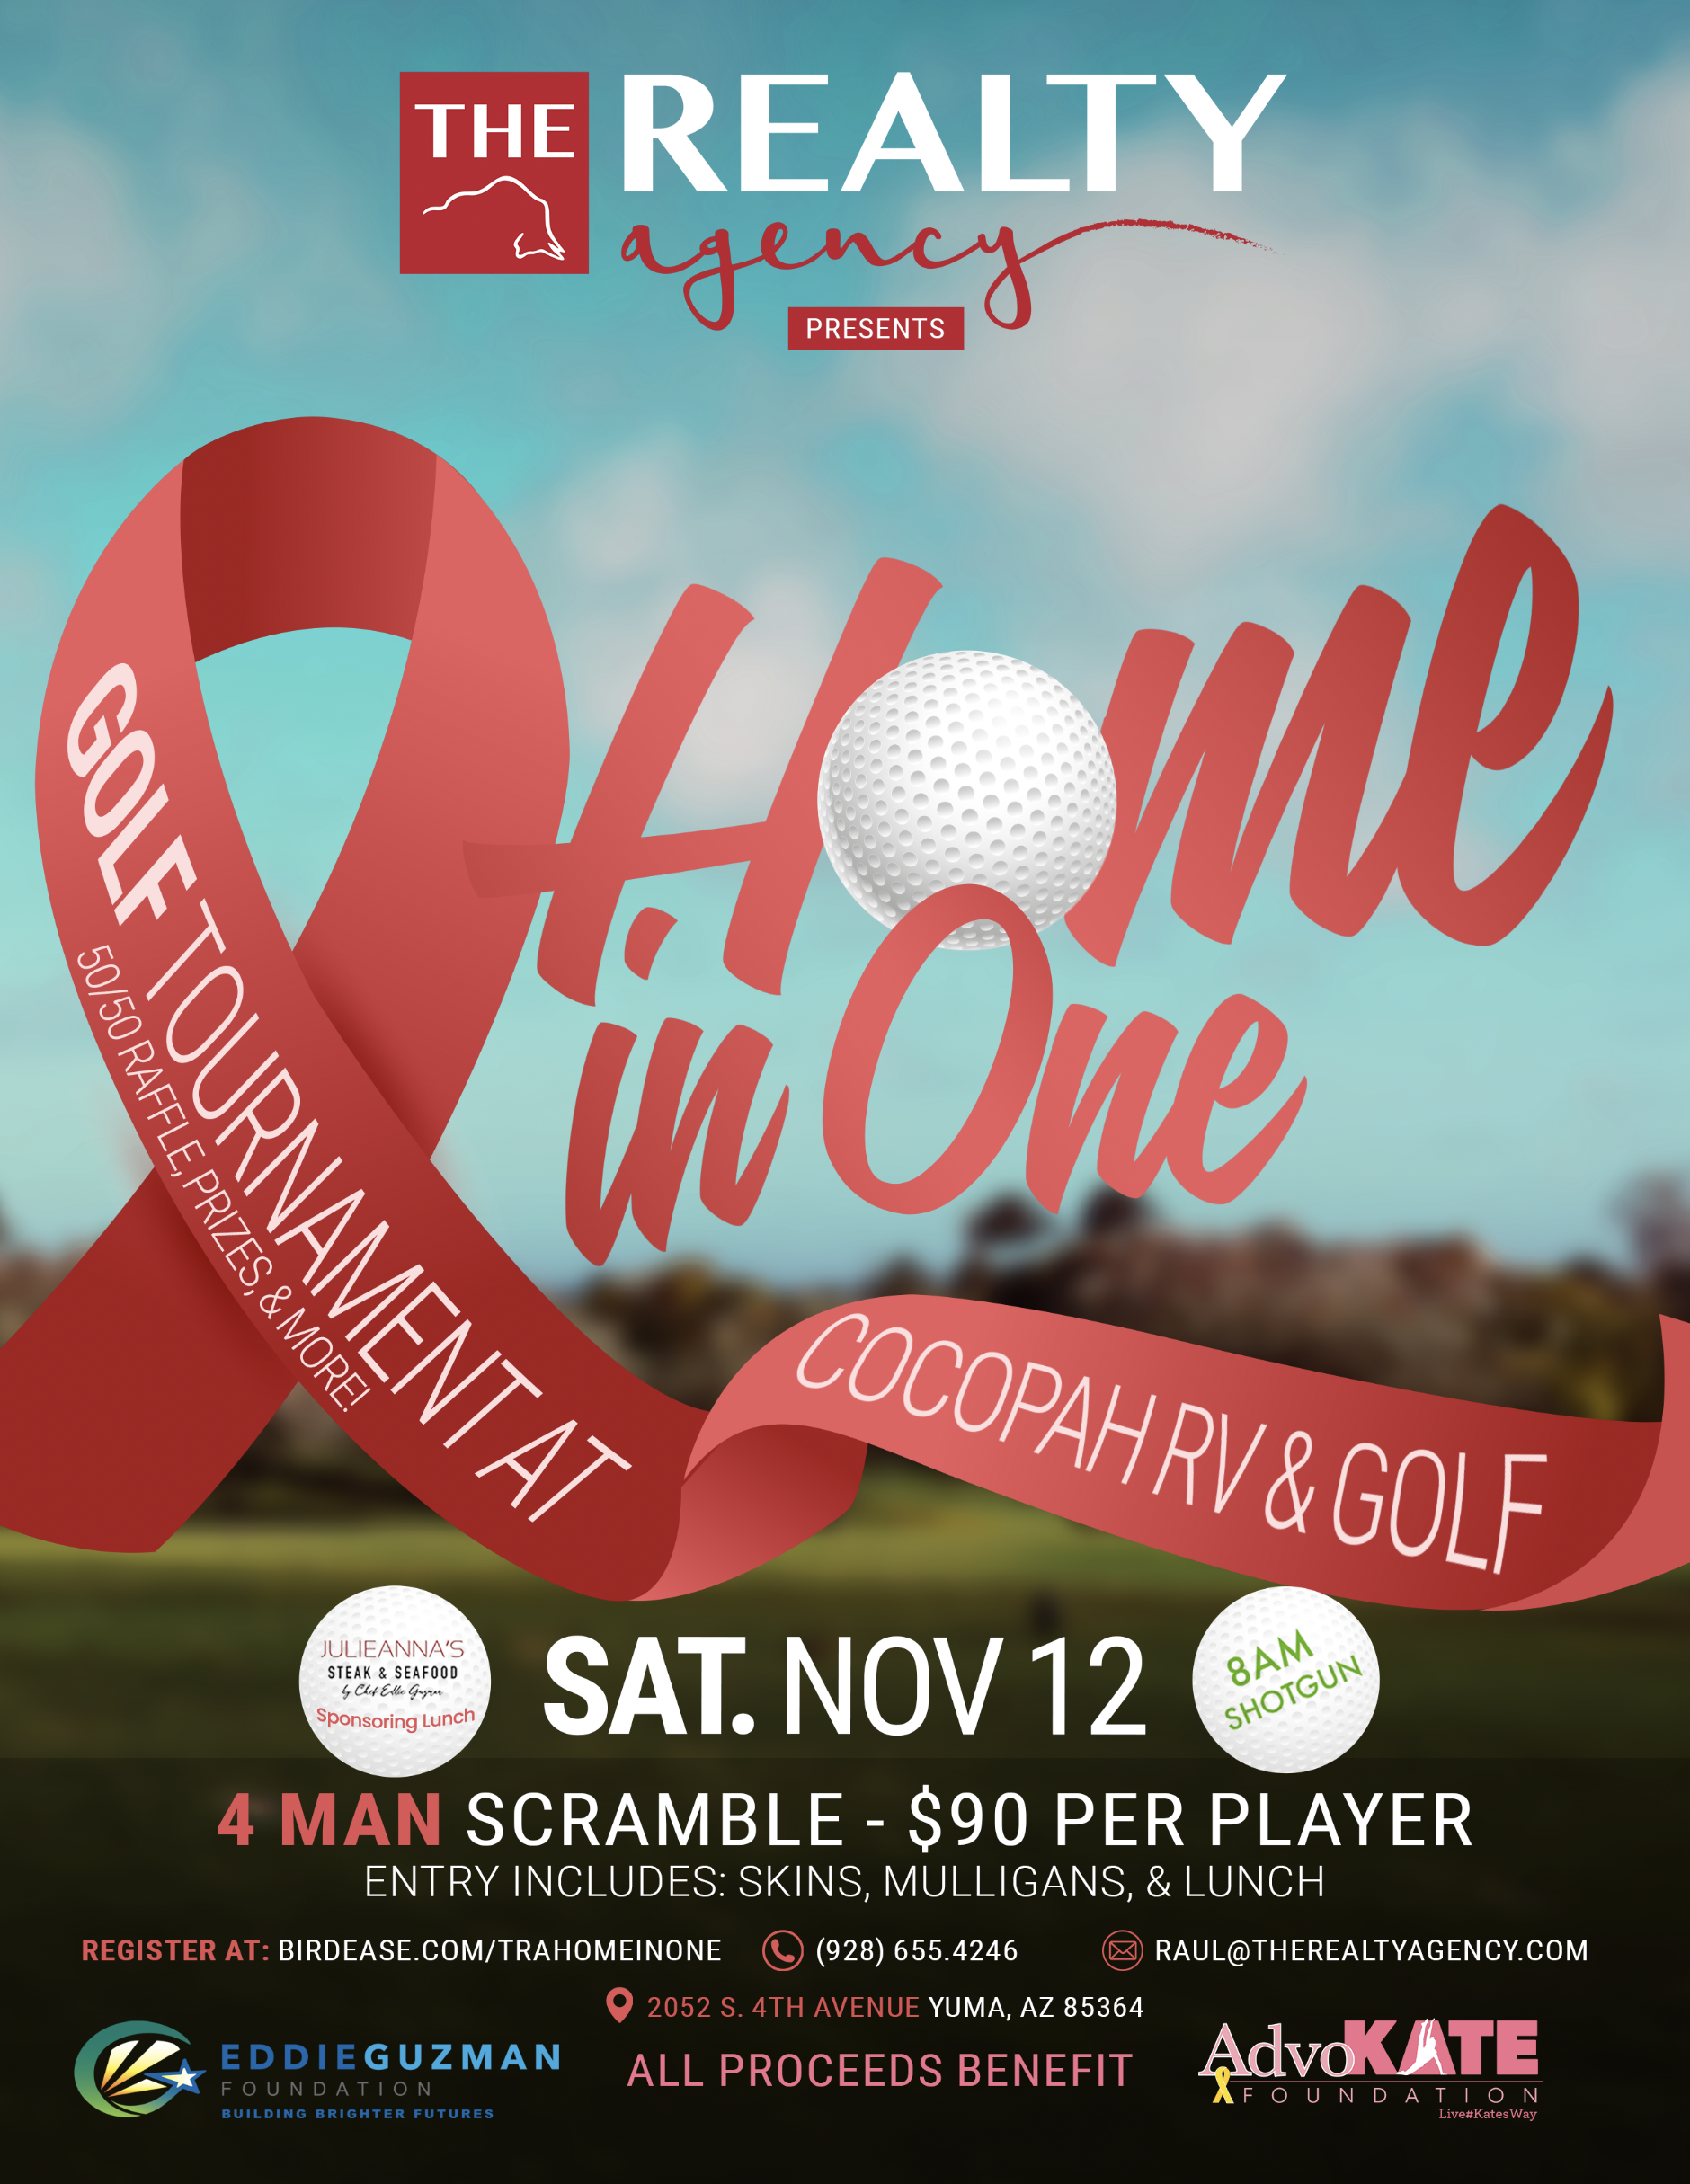 TRA's Annual Home-In-One Golf Tournament 